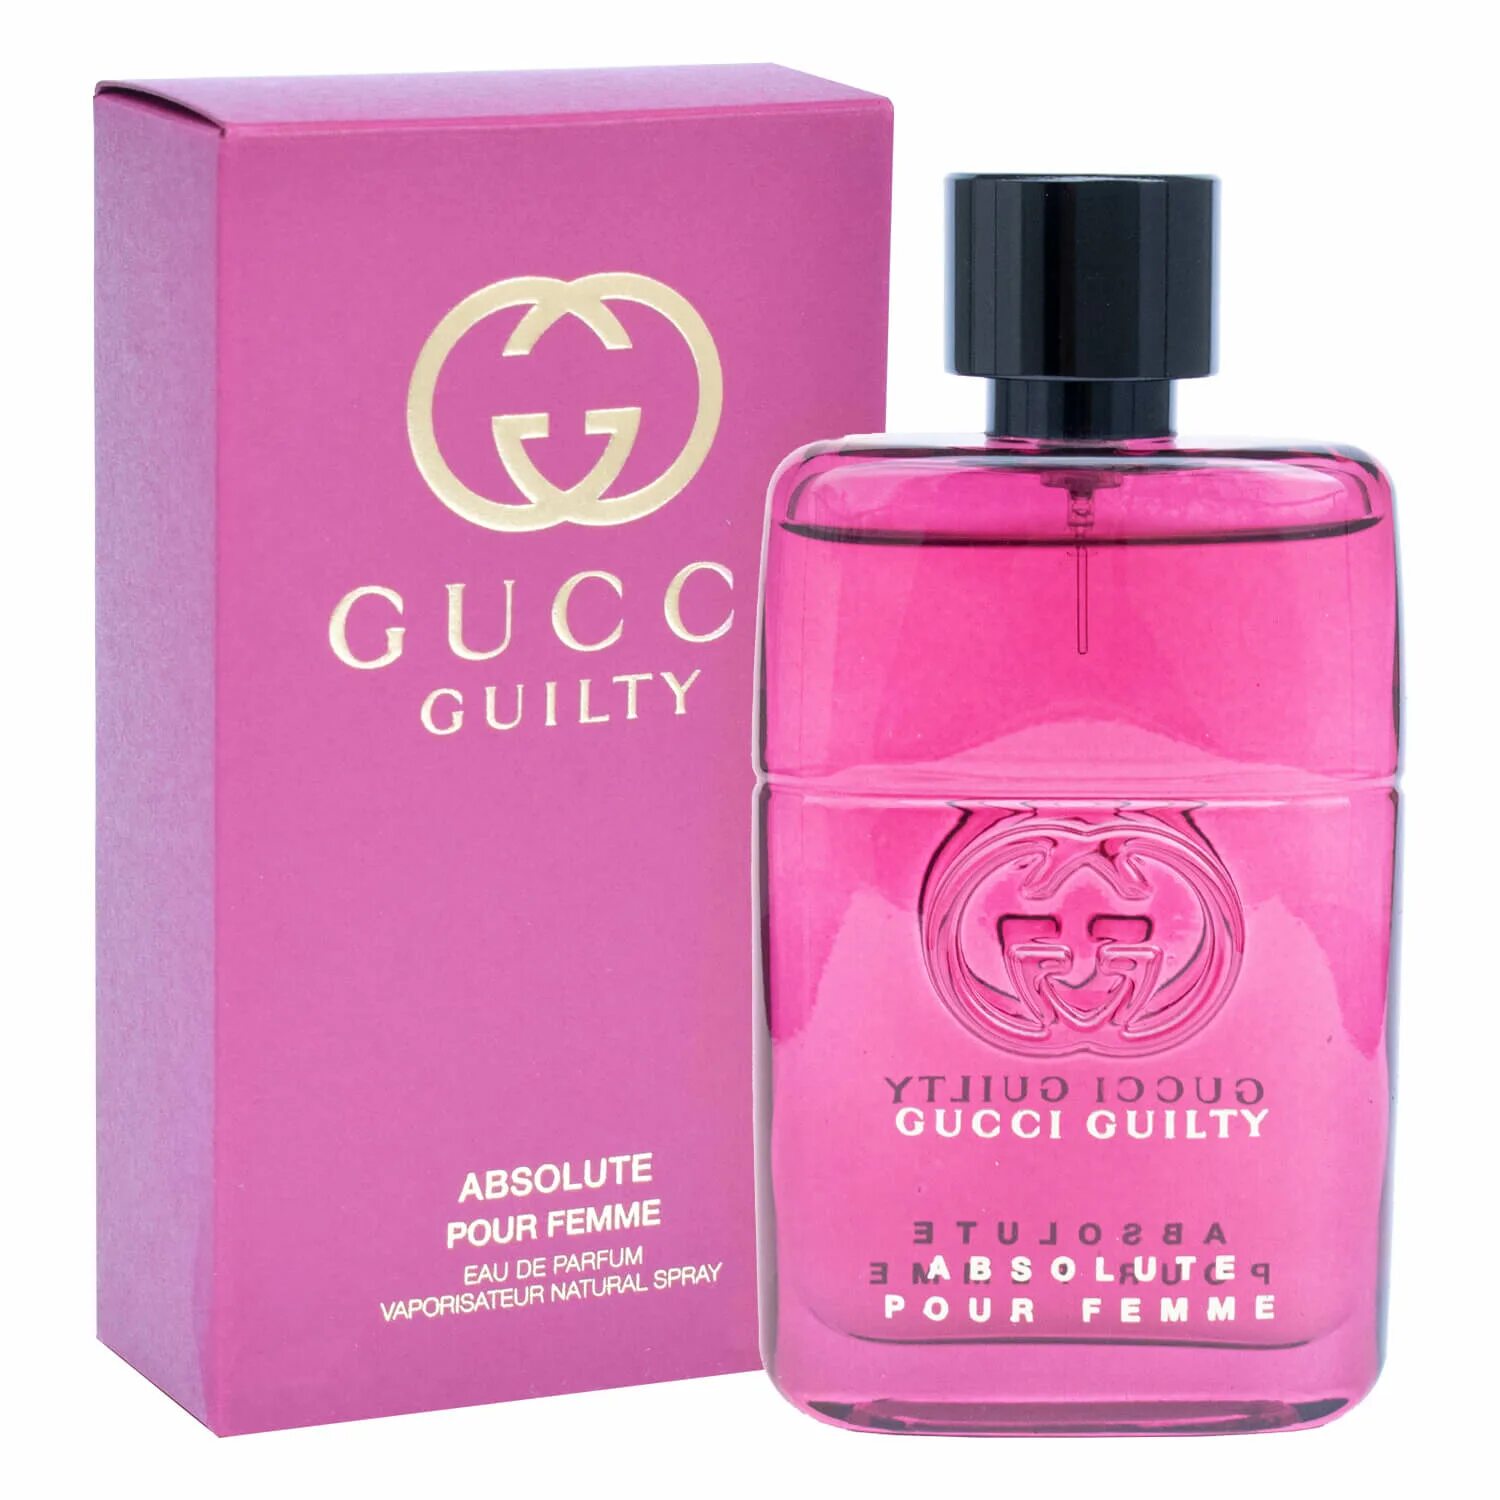 Gucci guilty absolute pour femme EDP 50ml. Gucci guilty absolute pour femme. Gucci guilty pour femme EDP 50ml. Gucci guilty absolute pour femme,90 мл. Gucci guilty absolute pour